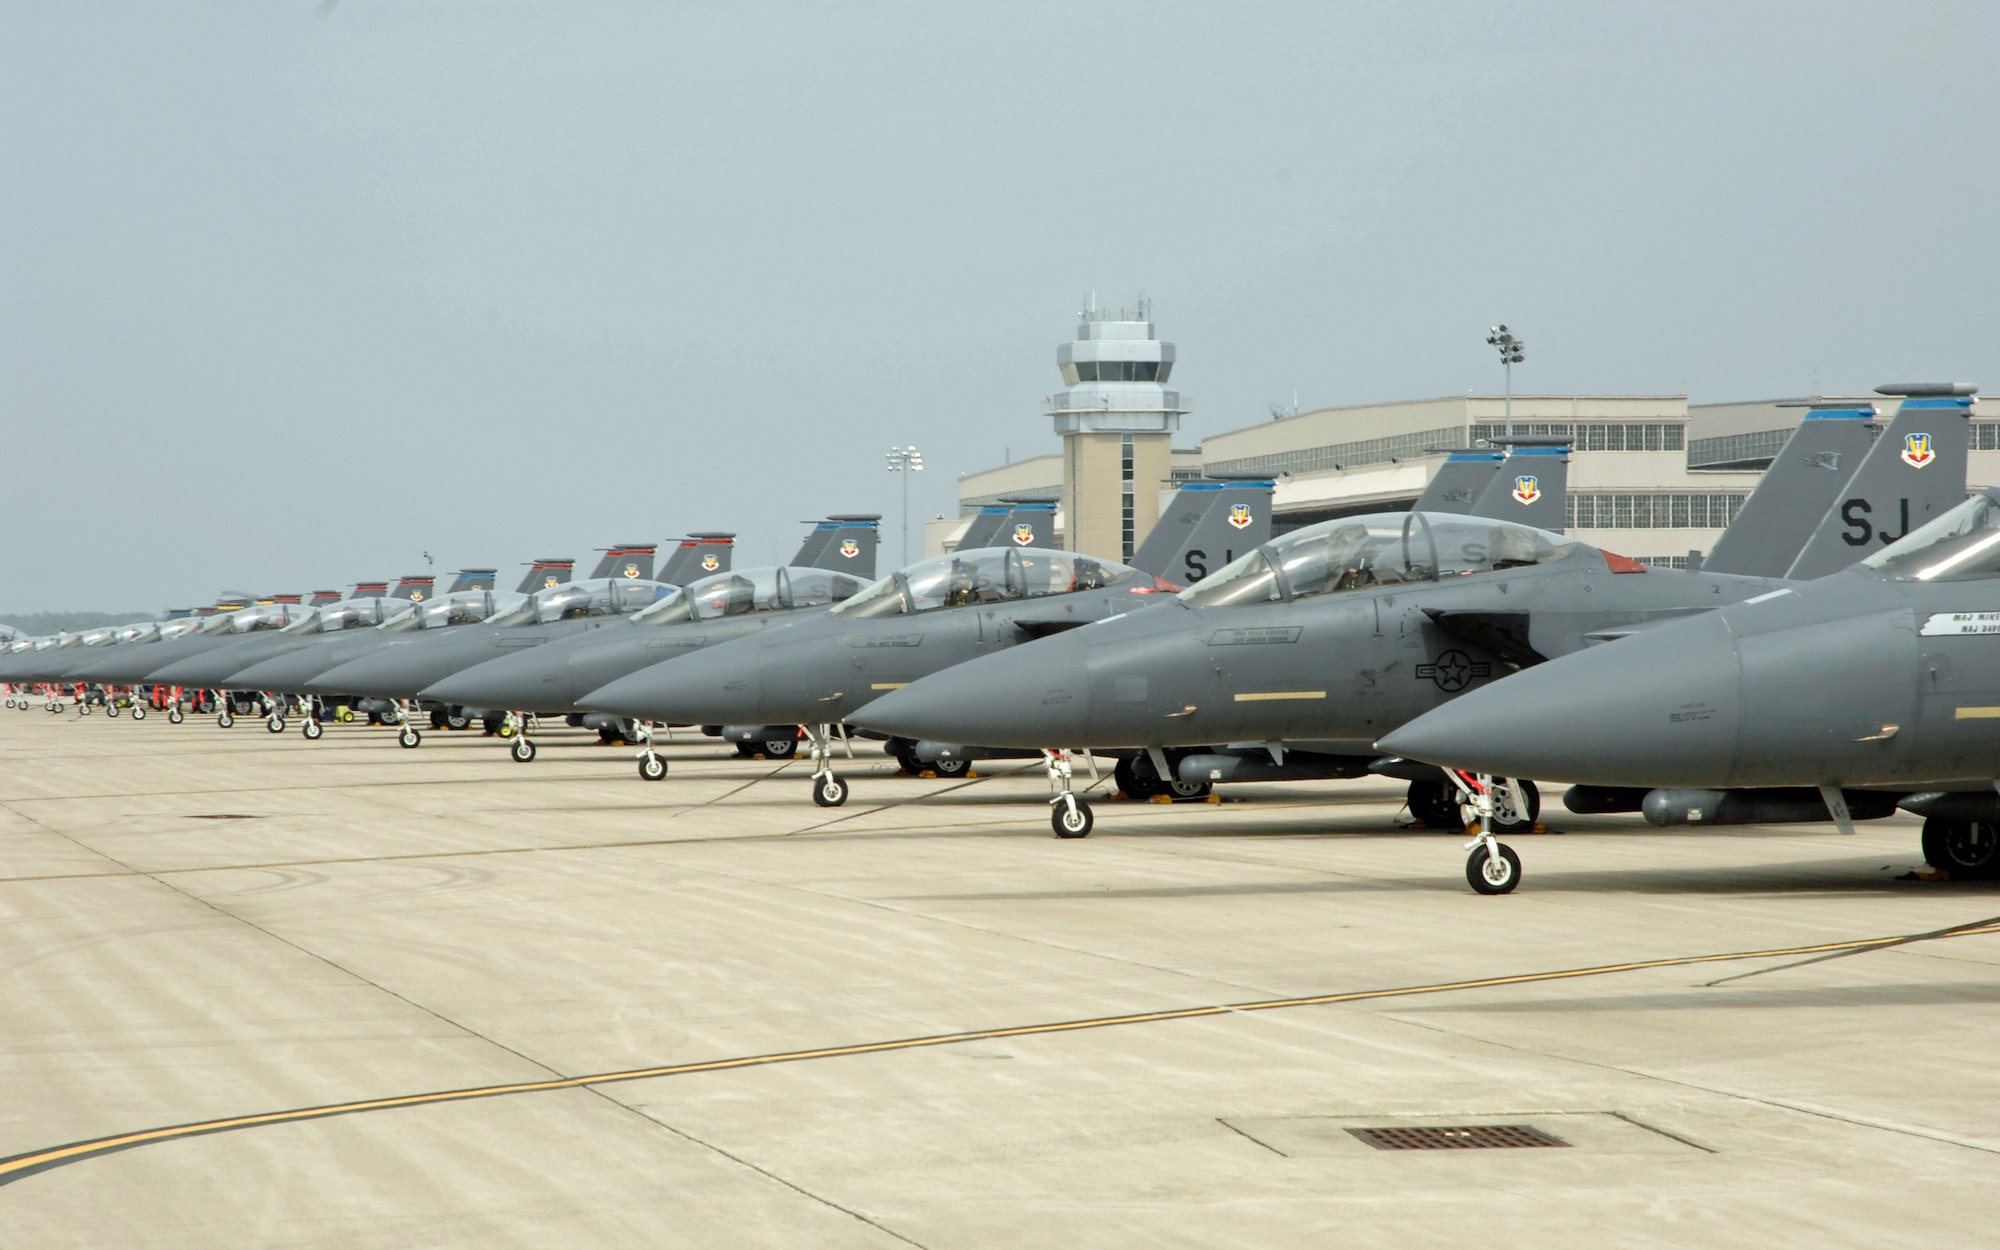 Some of the 75 F-15E Strike Eagles deployed from the 4th Fighter Wing, Seymour Johnson Air Force Base, N.C. are parked on the vast parking ramp at Wright-Patterson AFB, Ohio. By Friday afternoon, Sept. 5, more than 100 Air Force, Navy and Marine Corps aircraft sought safe haven at Wright-Patt from the approaching Tropical Storm Hanna. (U.S. Air Force photo/Al Bright)